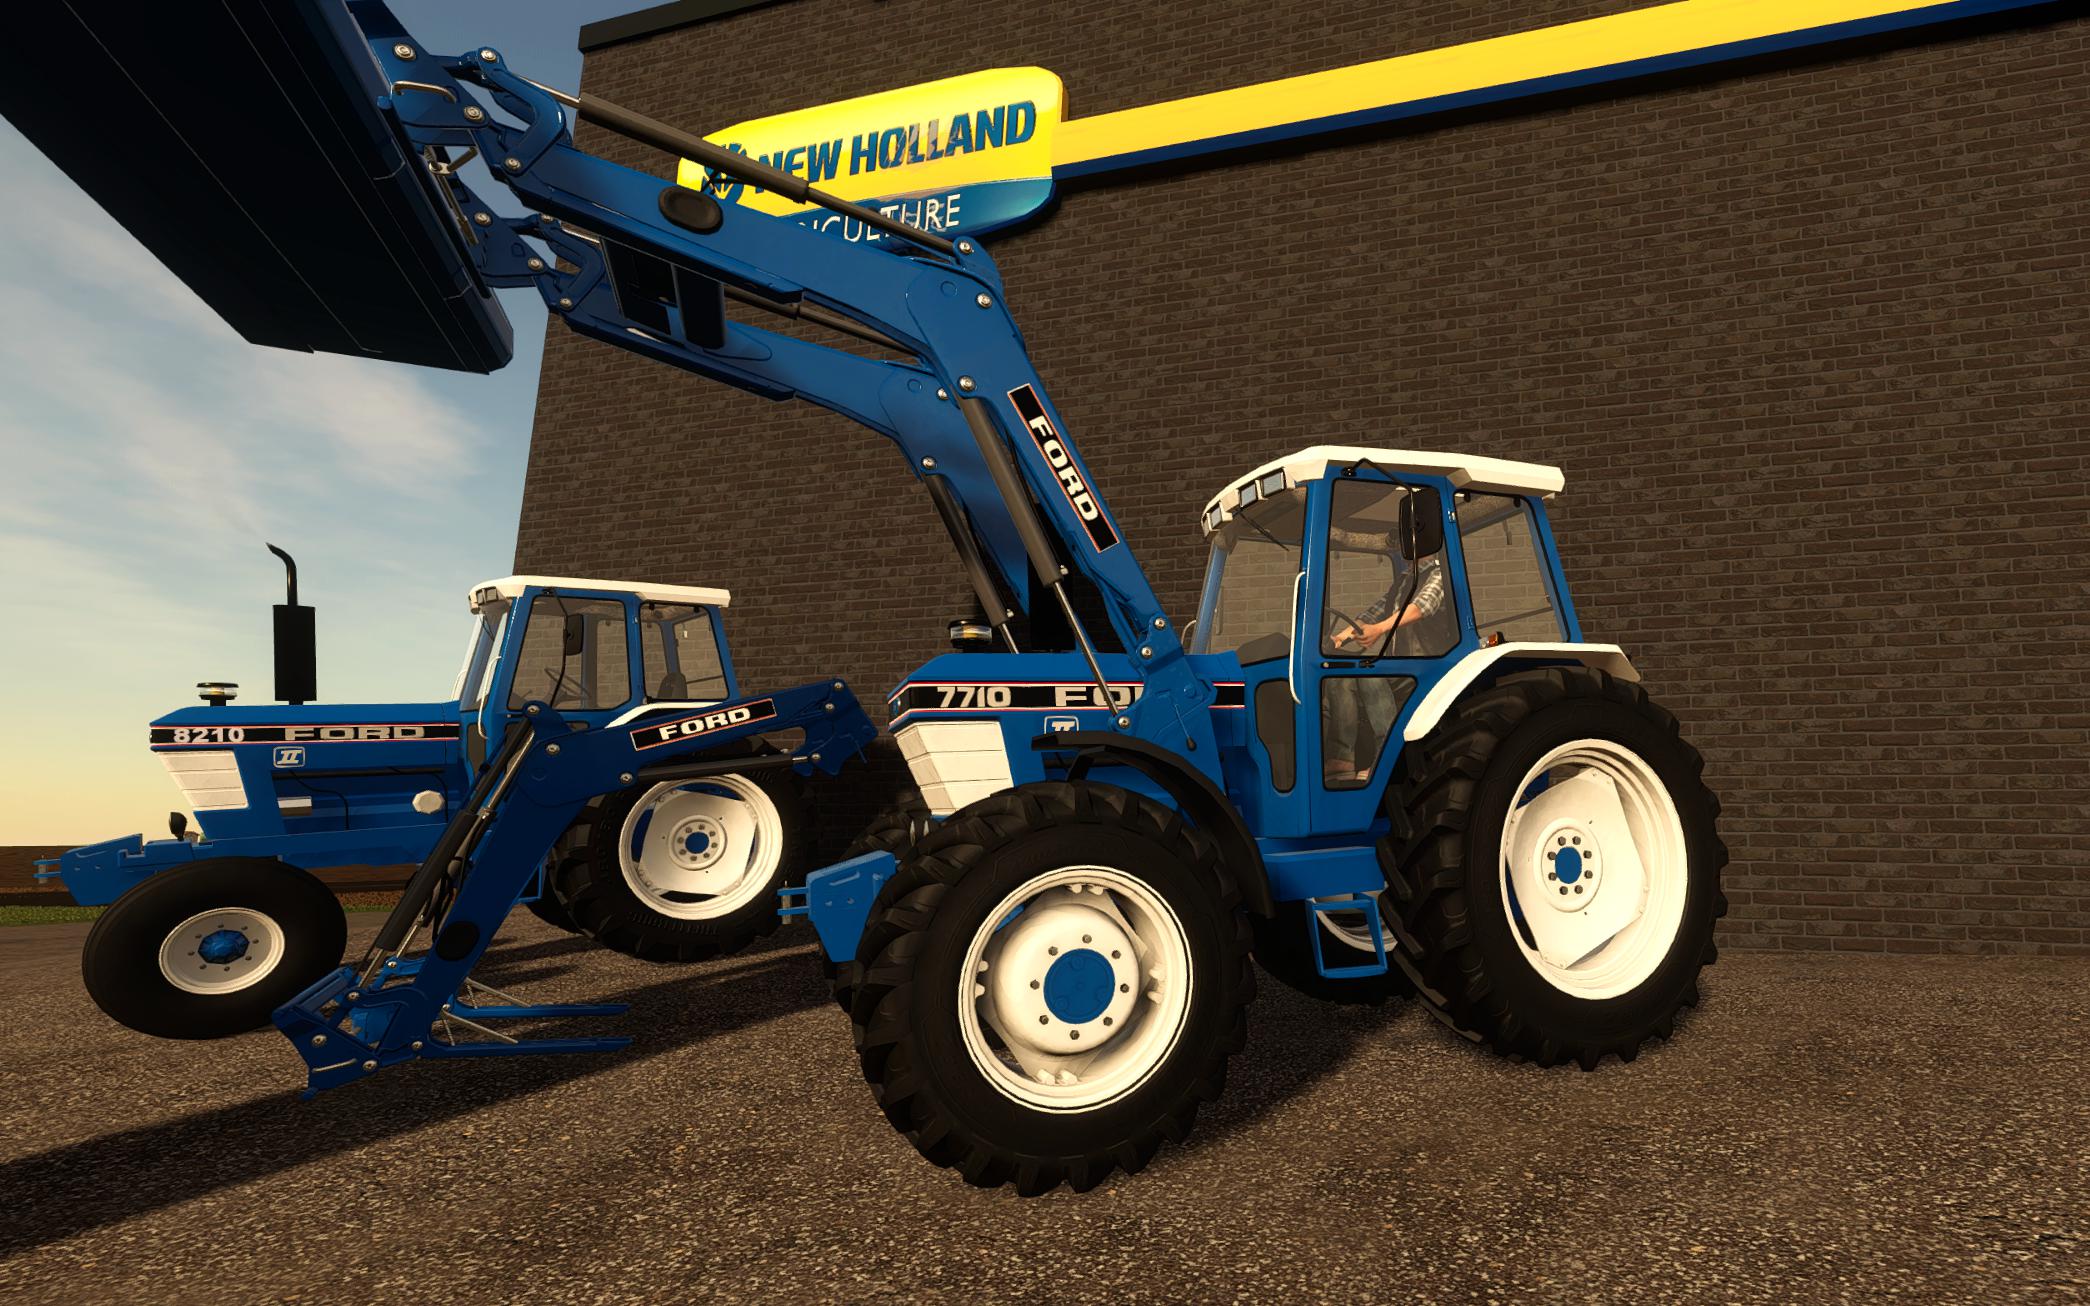 ford tractor mods for farming simulator 11